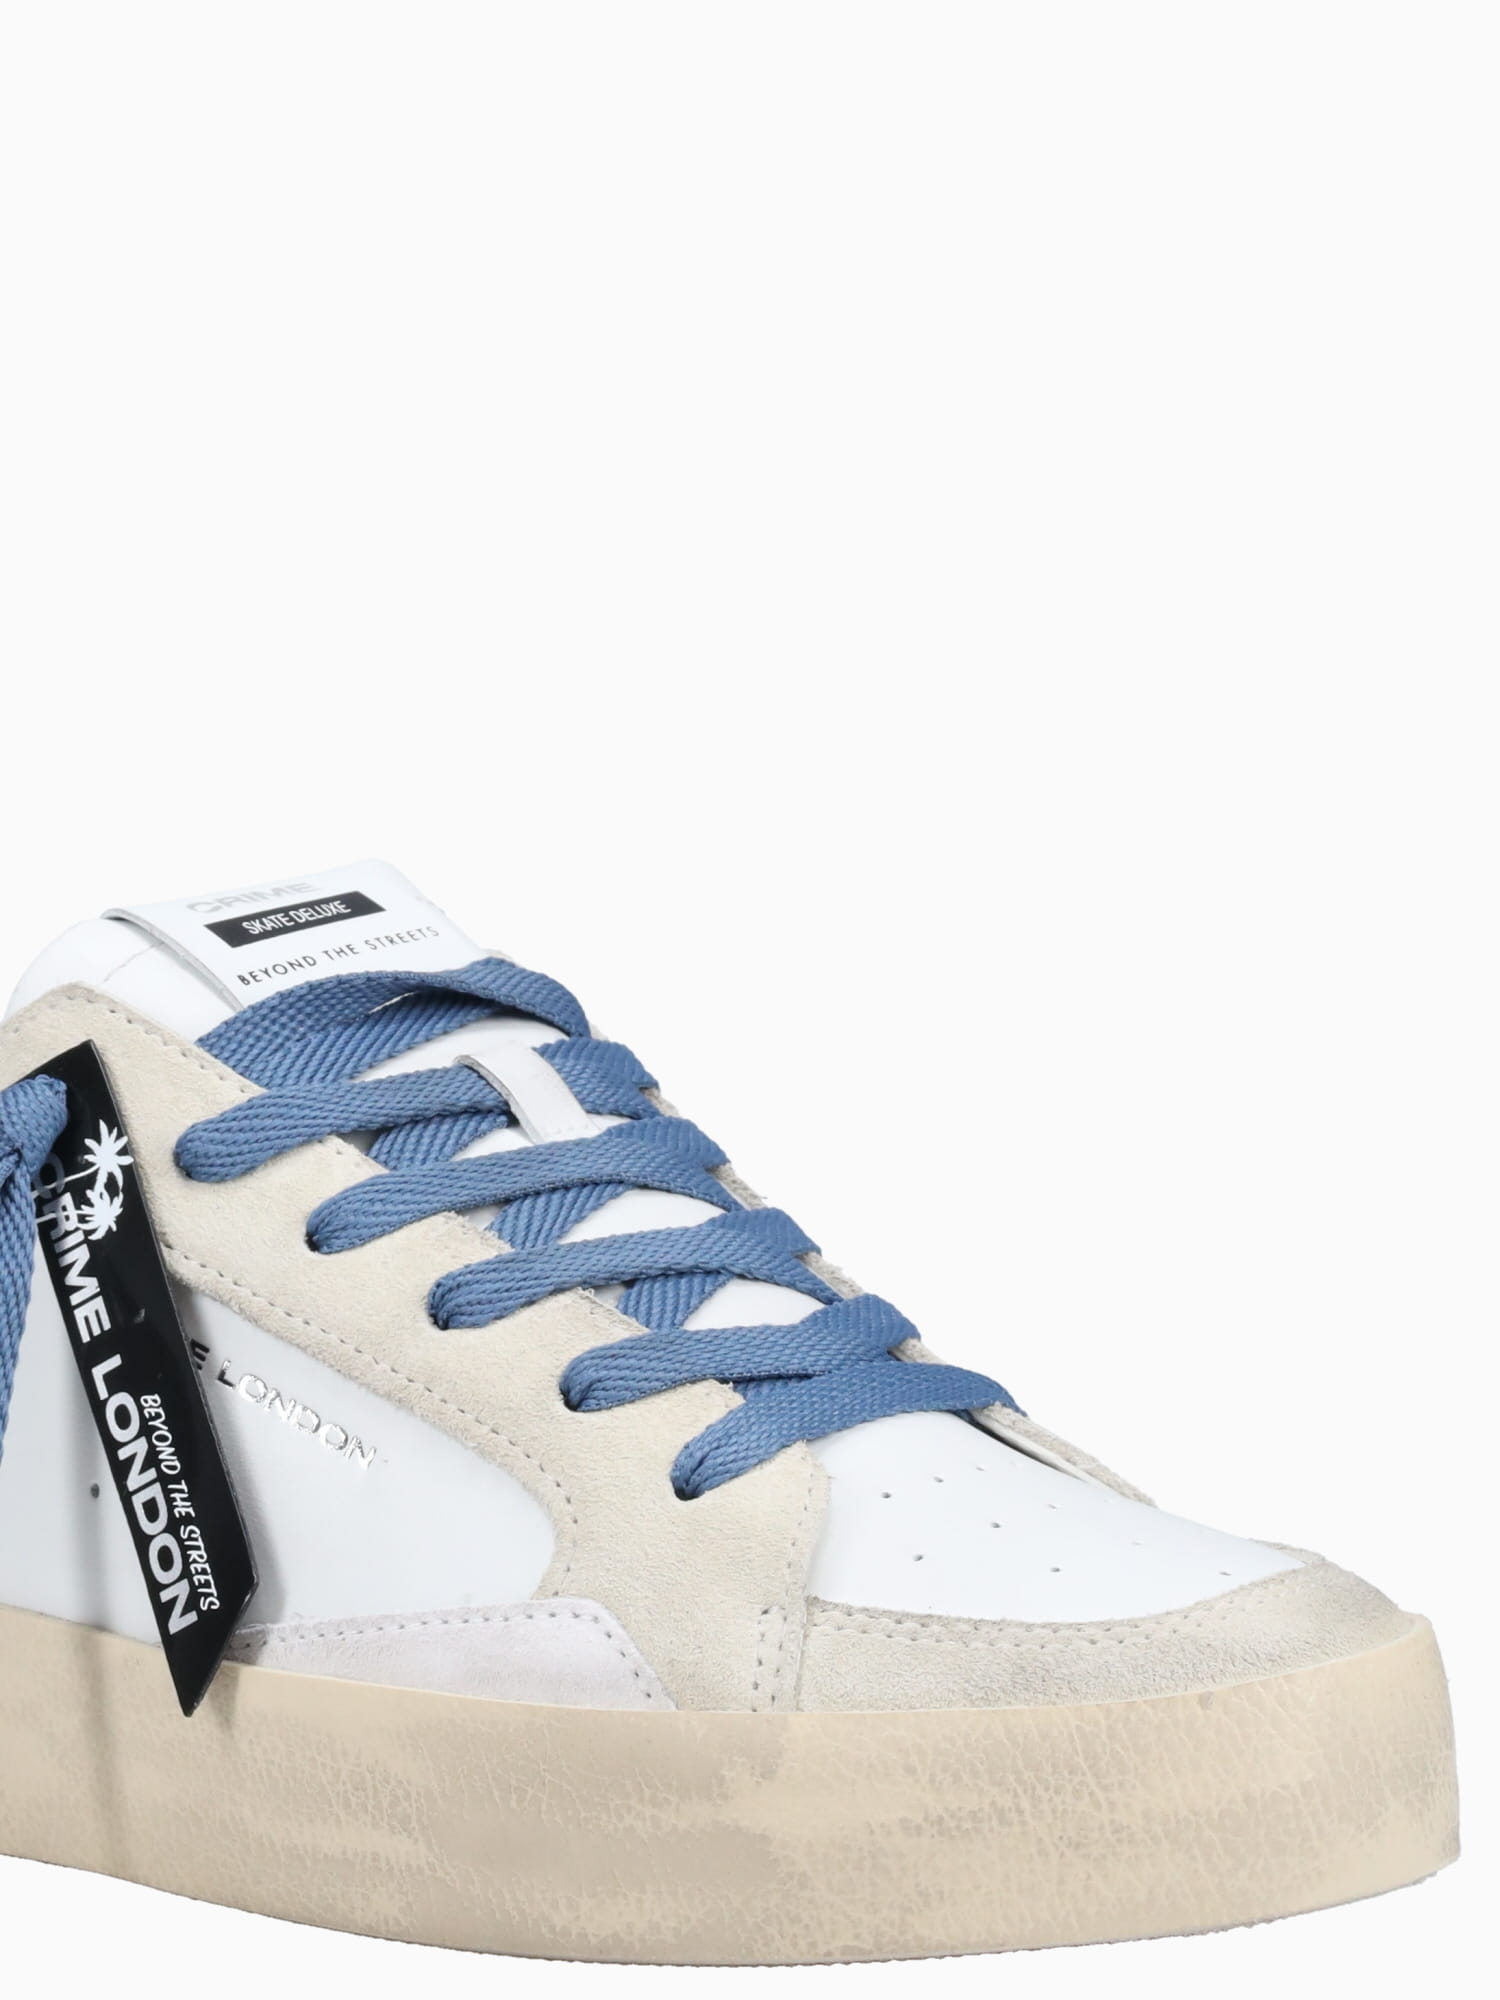 Sk8 Deluxe White Leather White / 40 / M